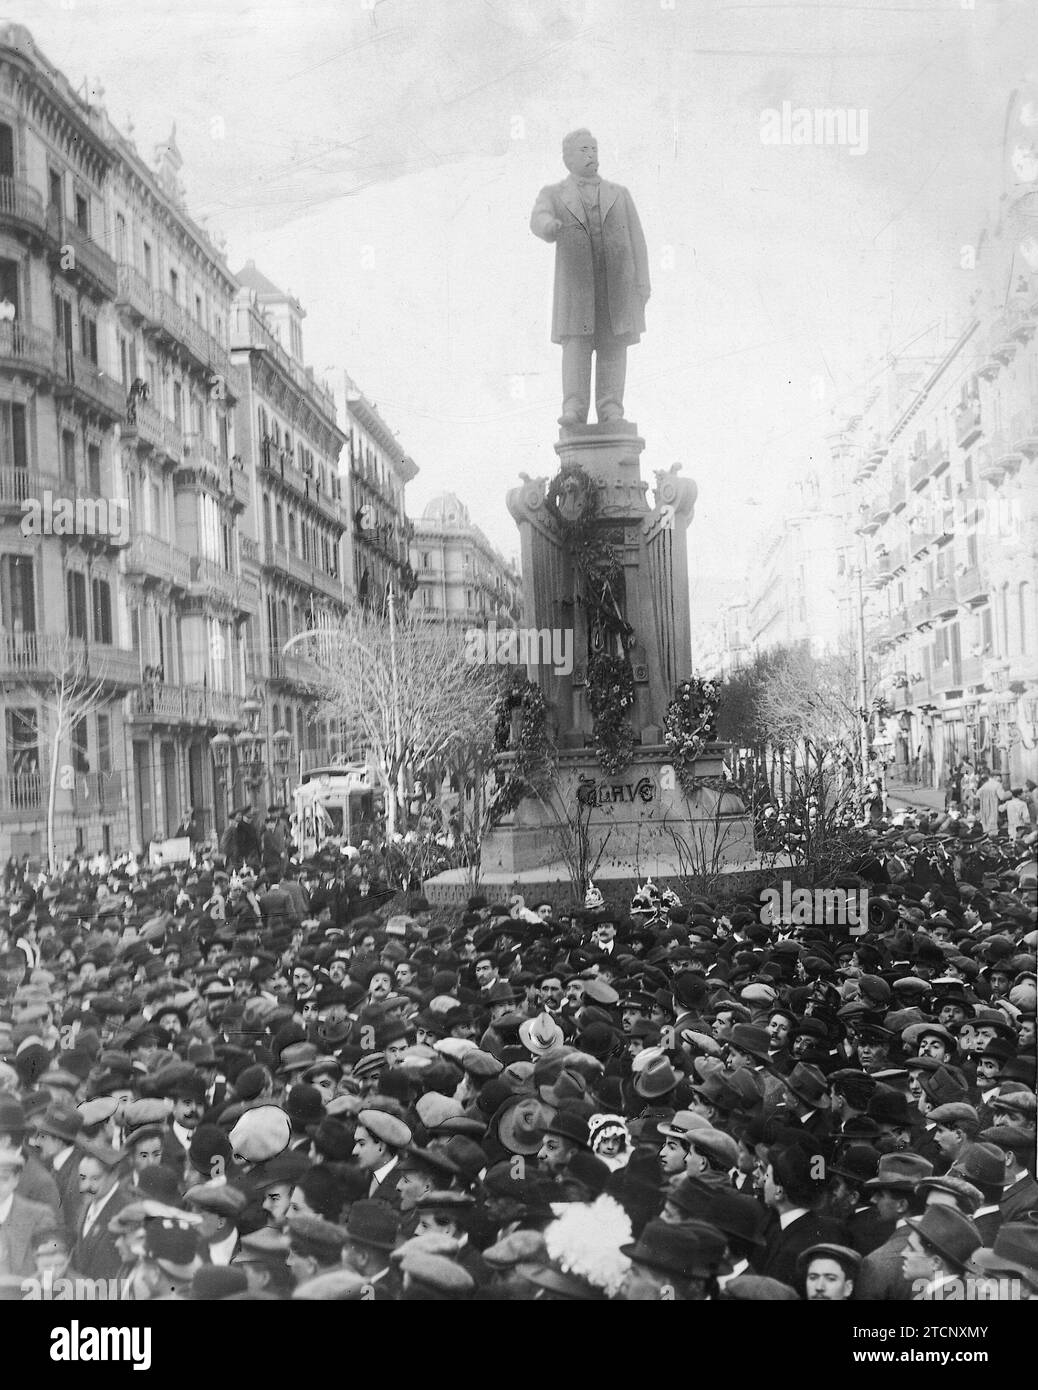 12/31/1912. The Bilbao choral society in Barcelona. The Orfeonistas Singing in front of the A Clavé monument, Surrounded by an Immense Crowd. Credit: Album / Archivo ABC / José Arija Stock Photo